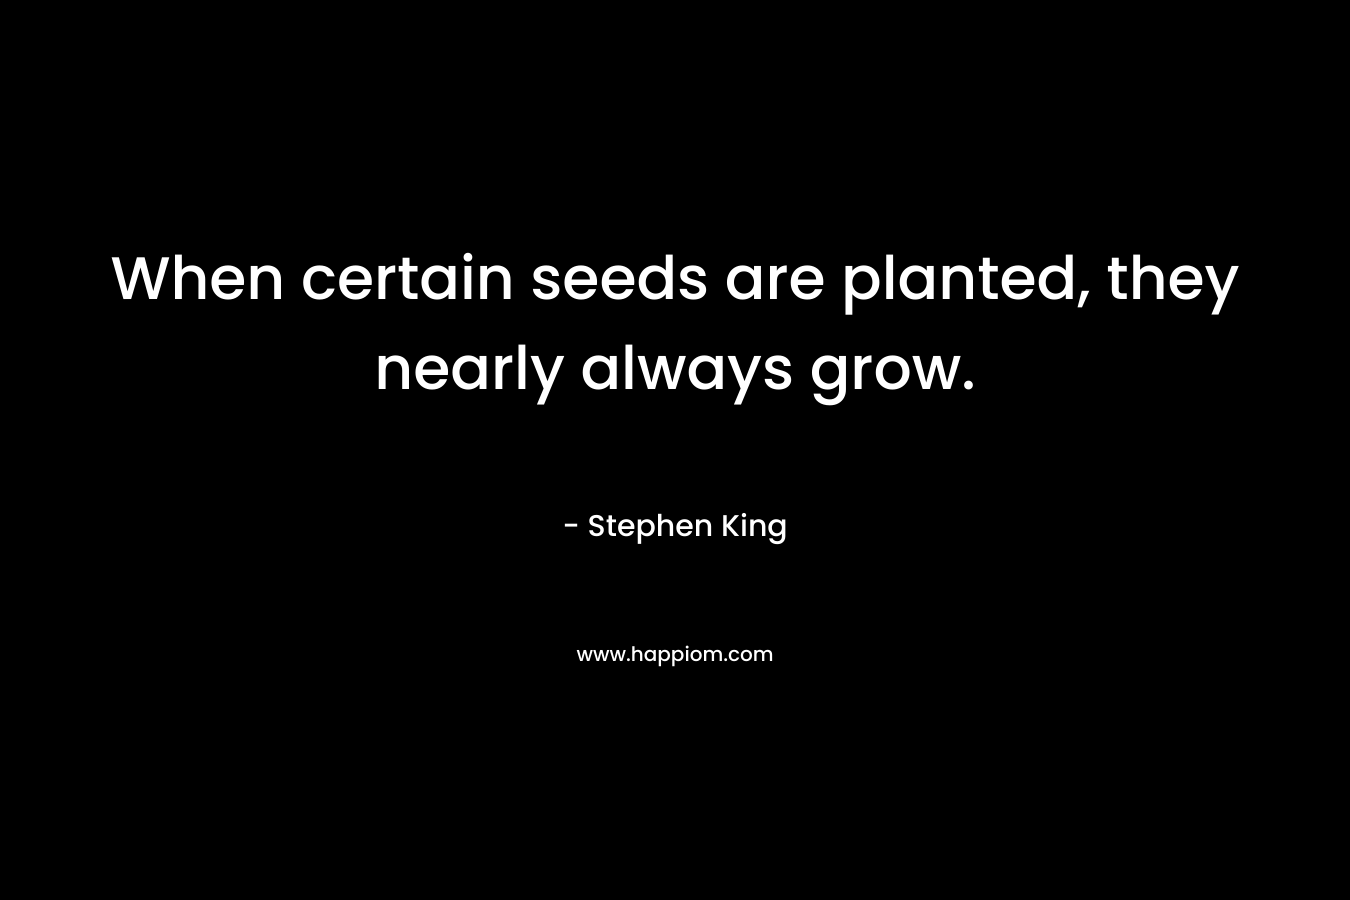 When certain seeds are planted, they nearly always grow.